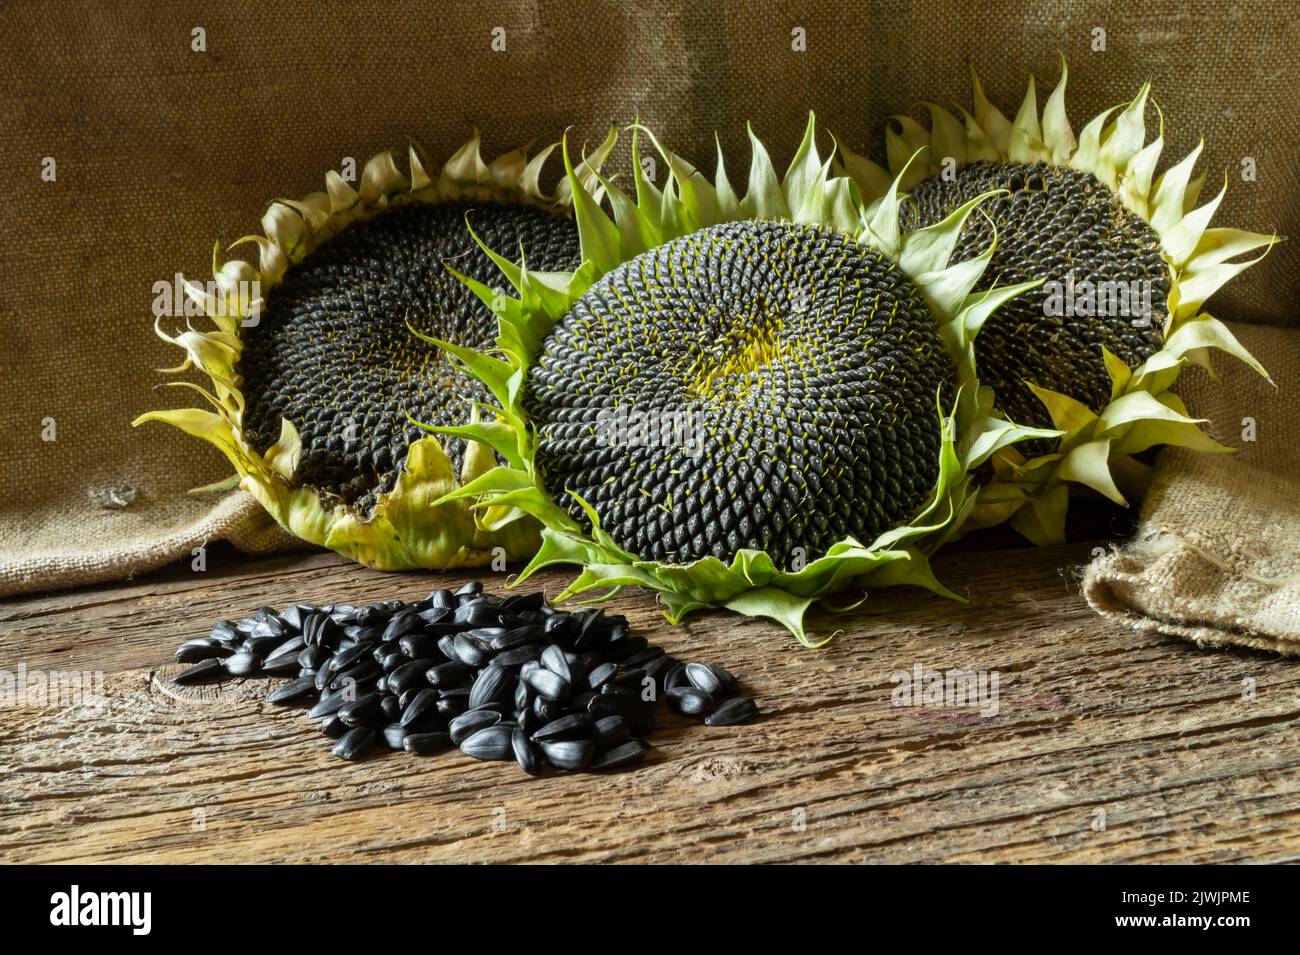 Still life with sunflowers and ripe seeds on a background of burlap. Harvesting in autumn. Beauty in nature Stock Photo